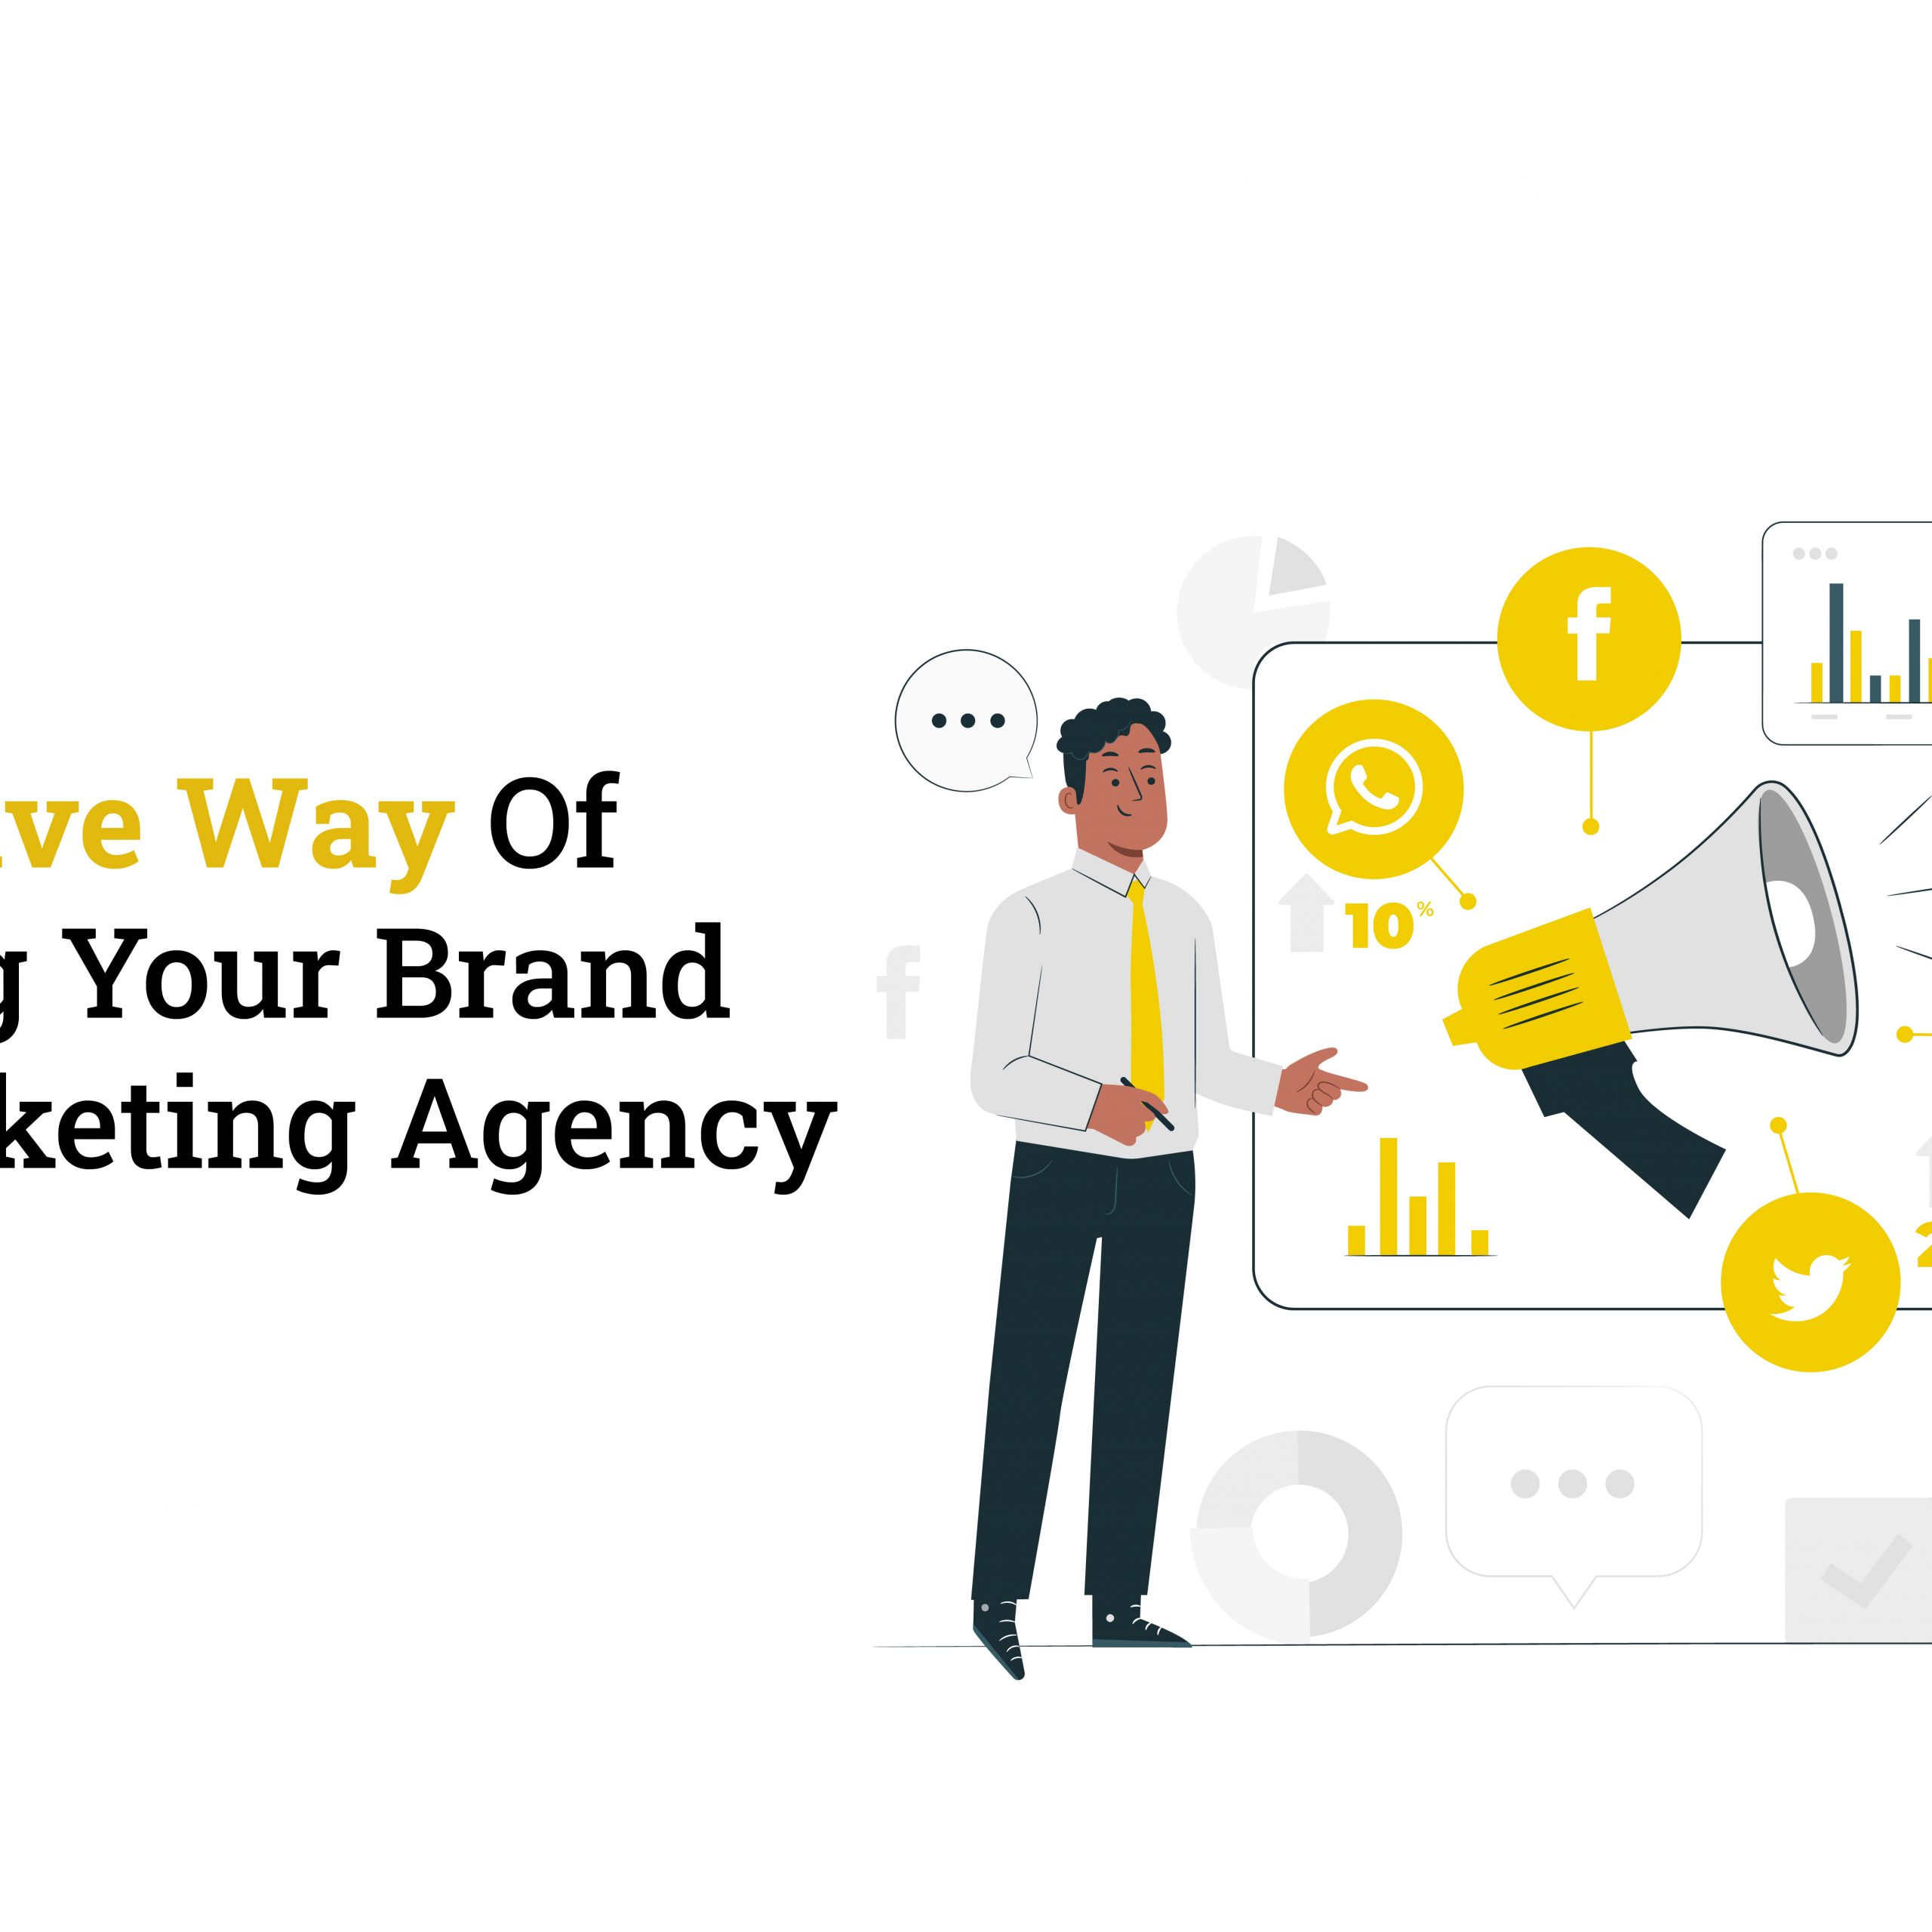 An Effective Way Of Marketing Your Brand With Marketing Agency